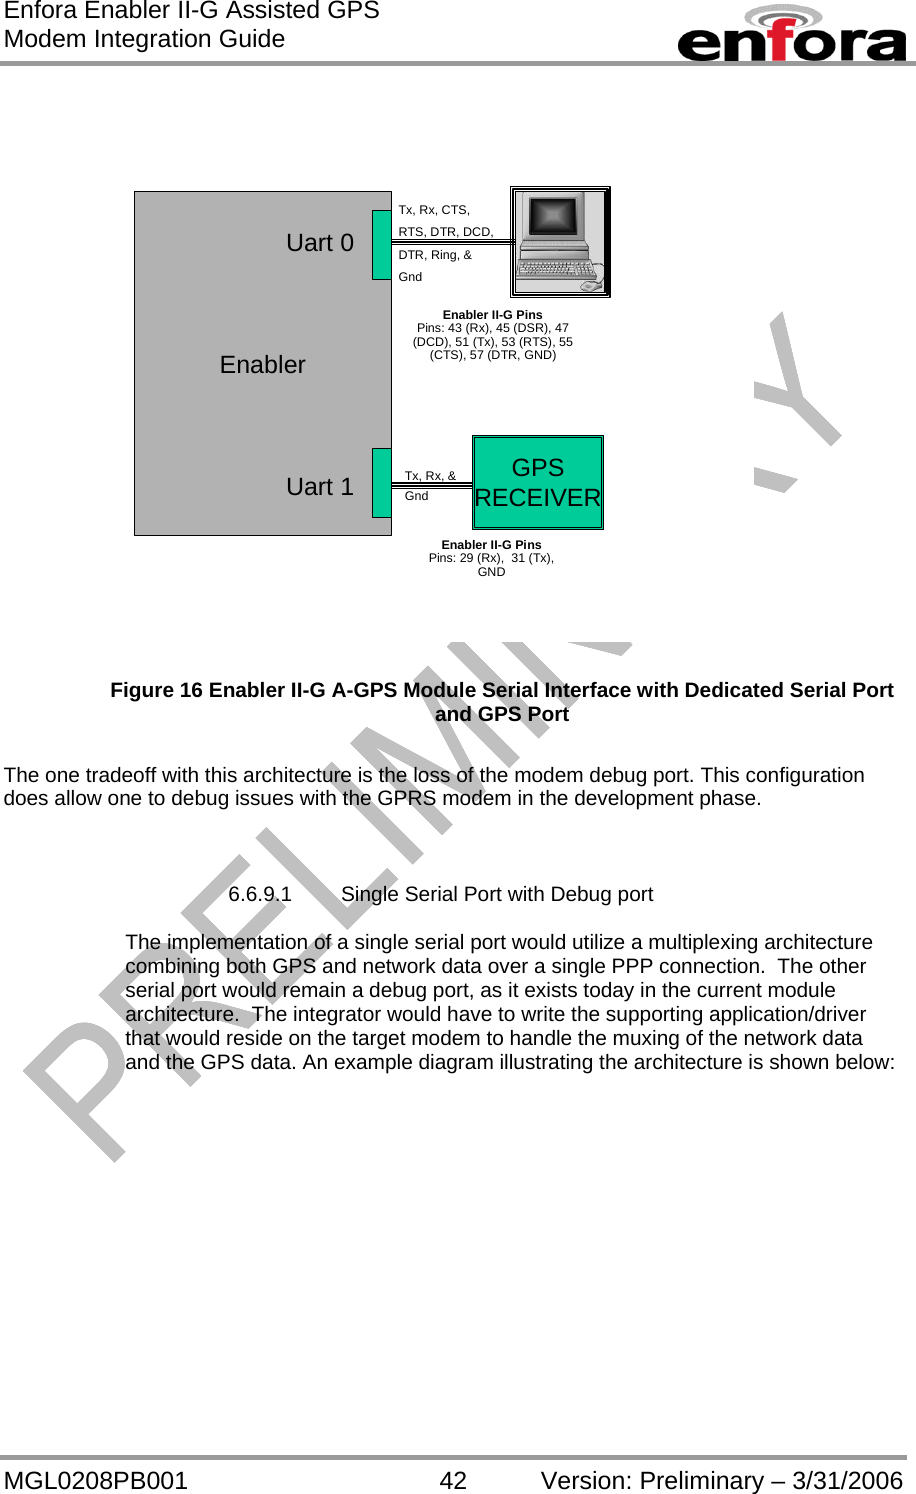 Enfora Enabler II-G Assisted GPS Modem Integration Guide MGL0208PB001 42 Version: Preliminary – 3/31/2006 EnablerUart 1Uart 0GPSRECEIVERTx, Rx, &amp; GndTx, Rx, CTS, RTS, DTR, DCD, DTR, Ring, &amp; GndEnabler II-G PinsPins: 43 (Rx), 45 (DSR), 47 (DCD), 51 (Tx), 53 (RTS), 55 (CTS), 57 (DTR, GND)Enabler II-G PinsPins: 29 (Rx),  31 (Tx), GND  Figure 16 Enabler II-G A-GPS Module Serial Interface with Dedicated Serial Port and GPS Port  The one tradeoff with this architecture is the loss of the modem debug port. This configuration does allow one to debug issues with the GPRS modem in the development phase.         6.6.9.1  Single Serial Port with Debug port  The implementation of a single serial port would utilize a multiplexing architecture combining both GPS and network data over a single PPP connection.  The other serial port would remain a debug port, as it exists today in the current module architecture.  The integrator would have to write the supporting application/driver that would reside on the target modem to handle the muxing of the network data and the GPS data. An example diagram illustrating the architecture is shown below:  